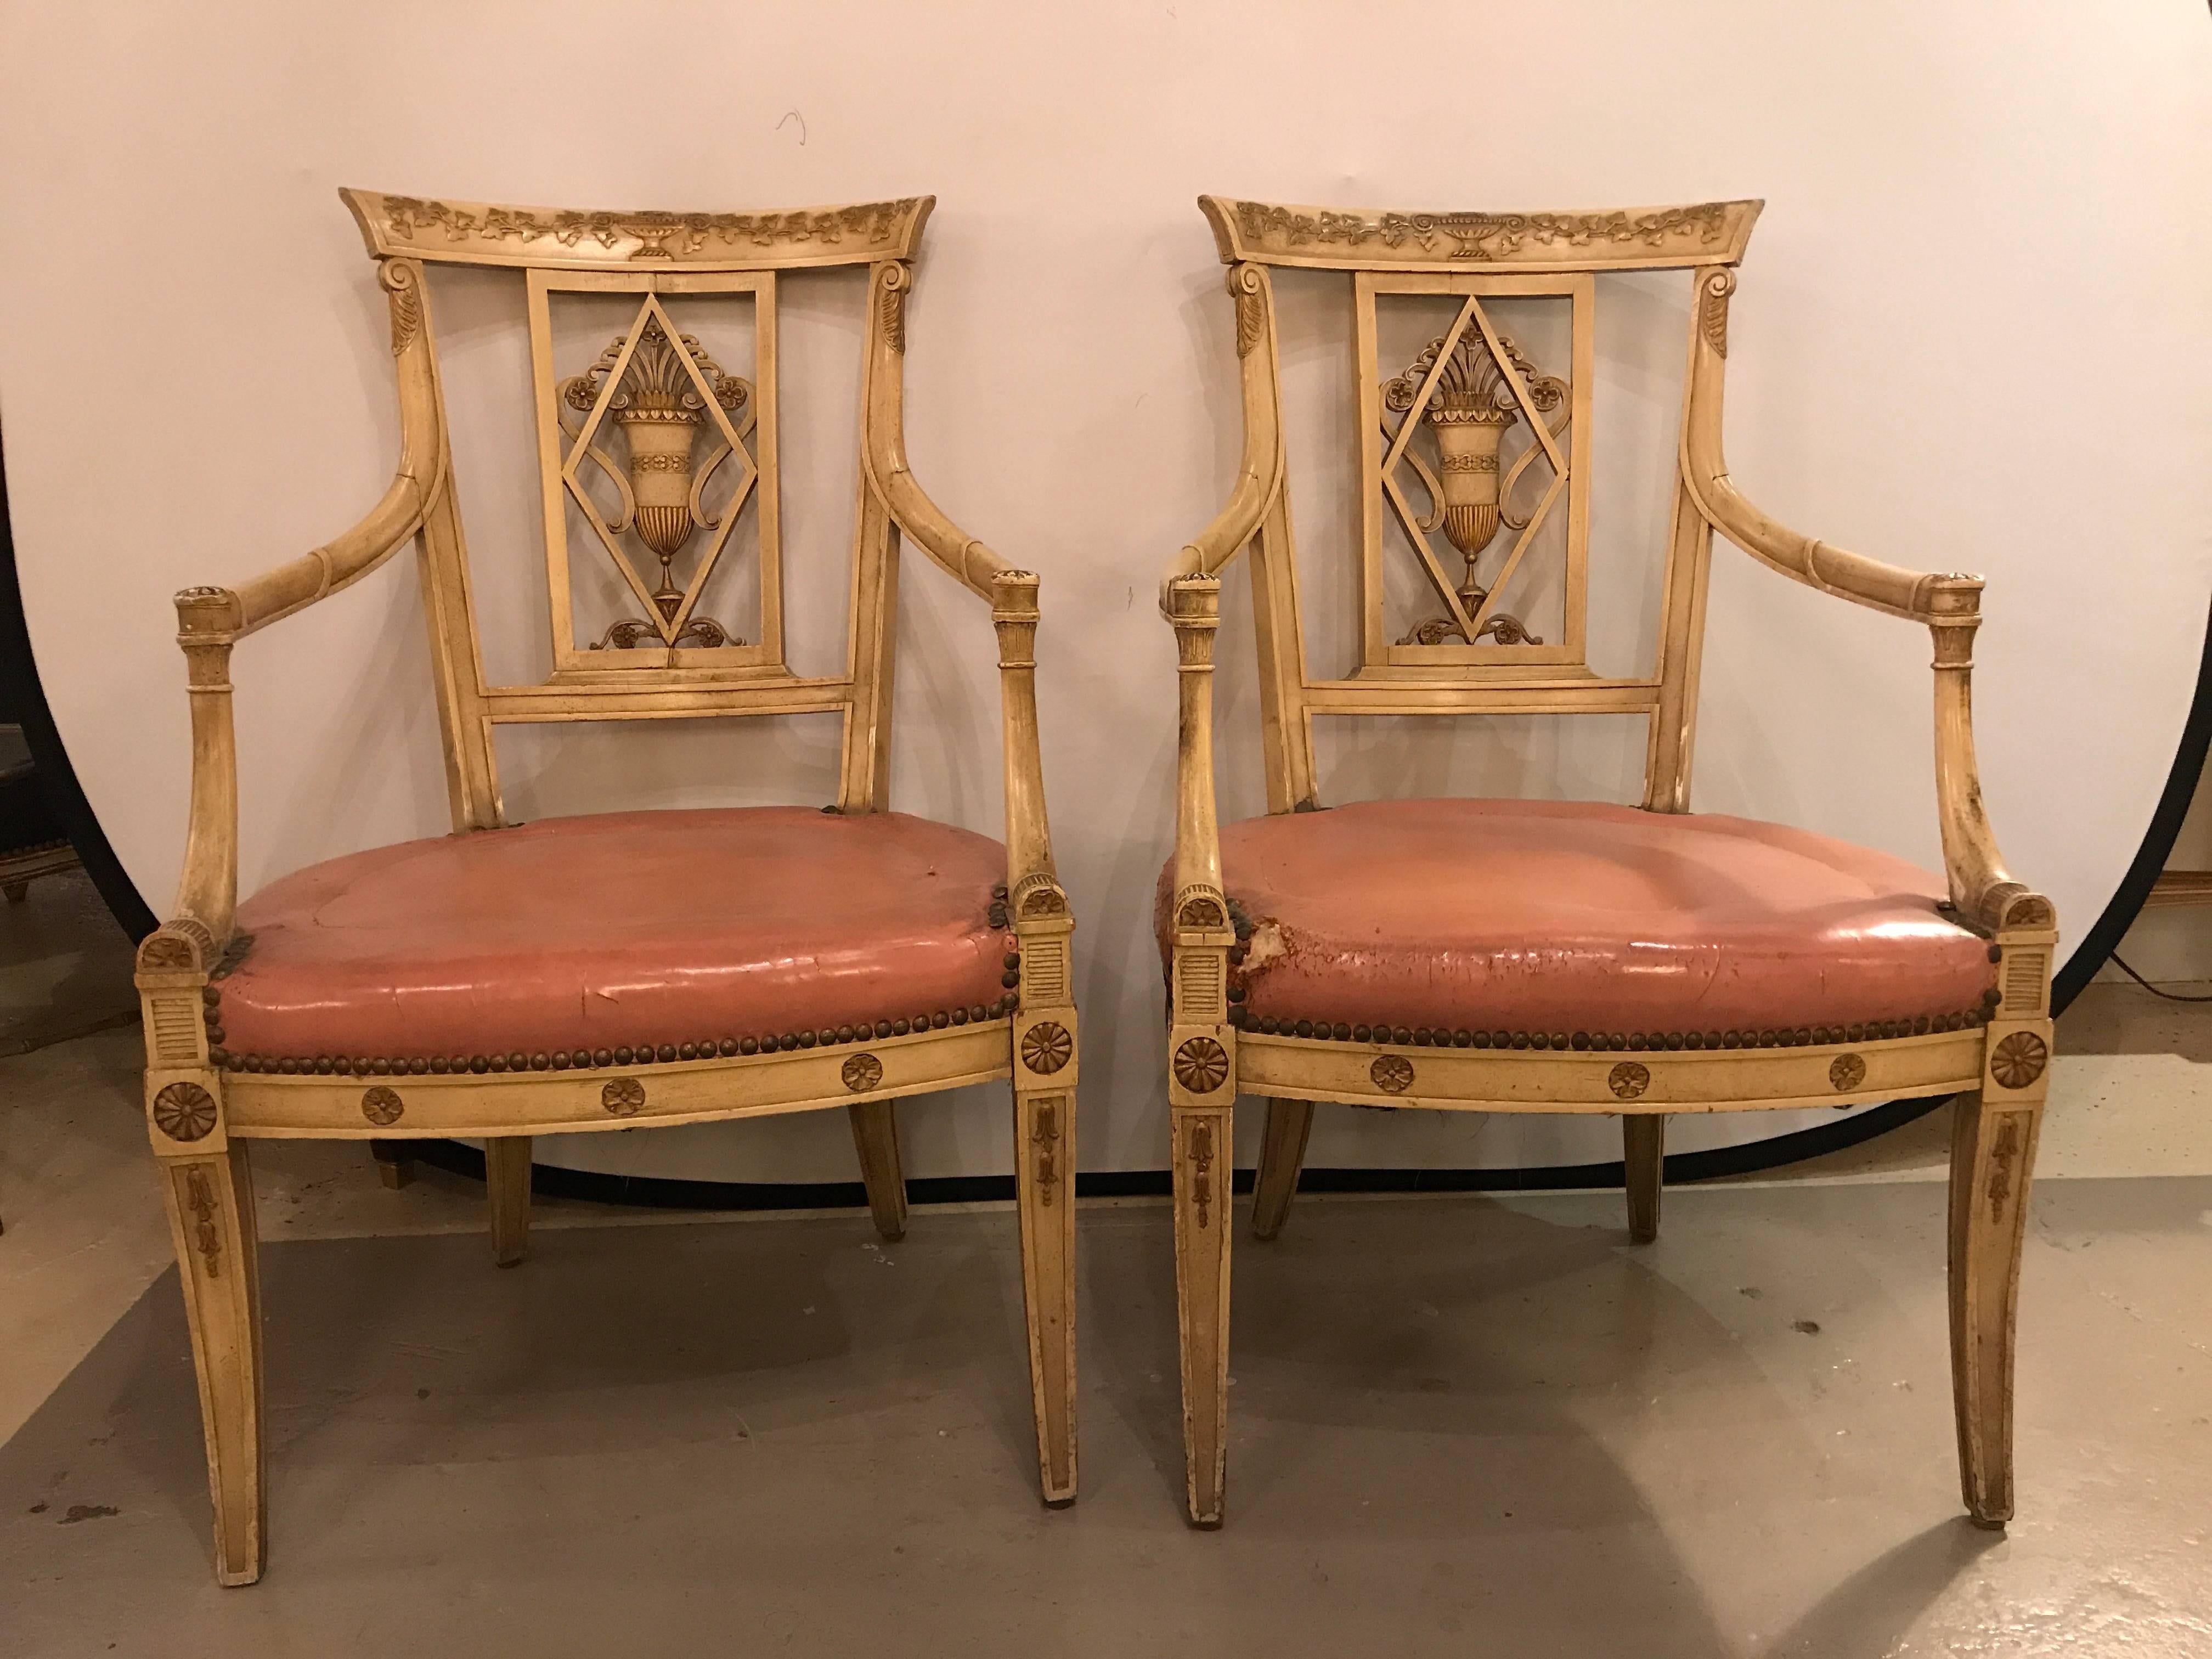 Having a Salmon colored padded seat come this finely detailed pair of Fauteuils by this highly sought after designer. The beige off-white colored frame with a backrest having a carved urn in the centre. The top of the backrest depicts an urn with